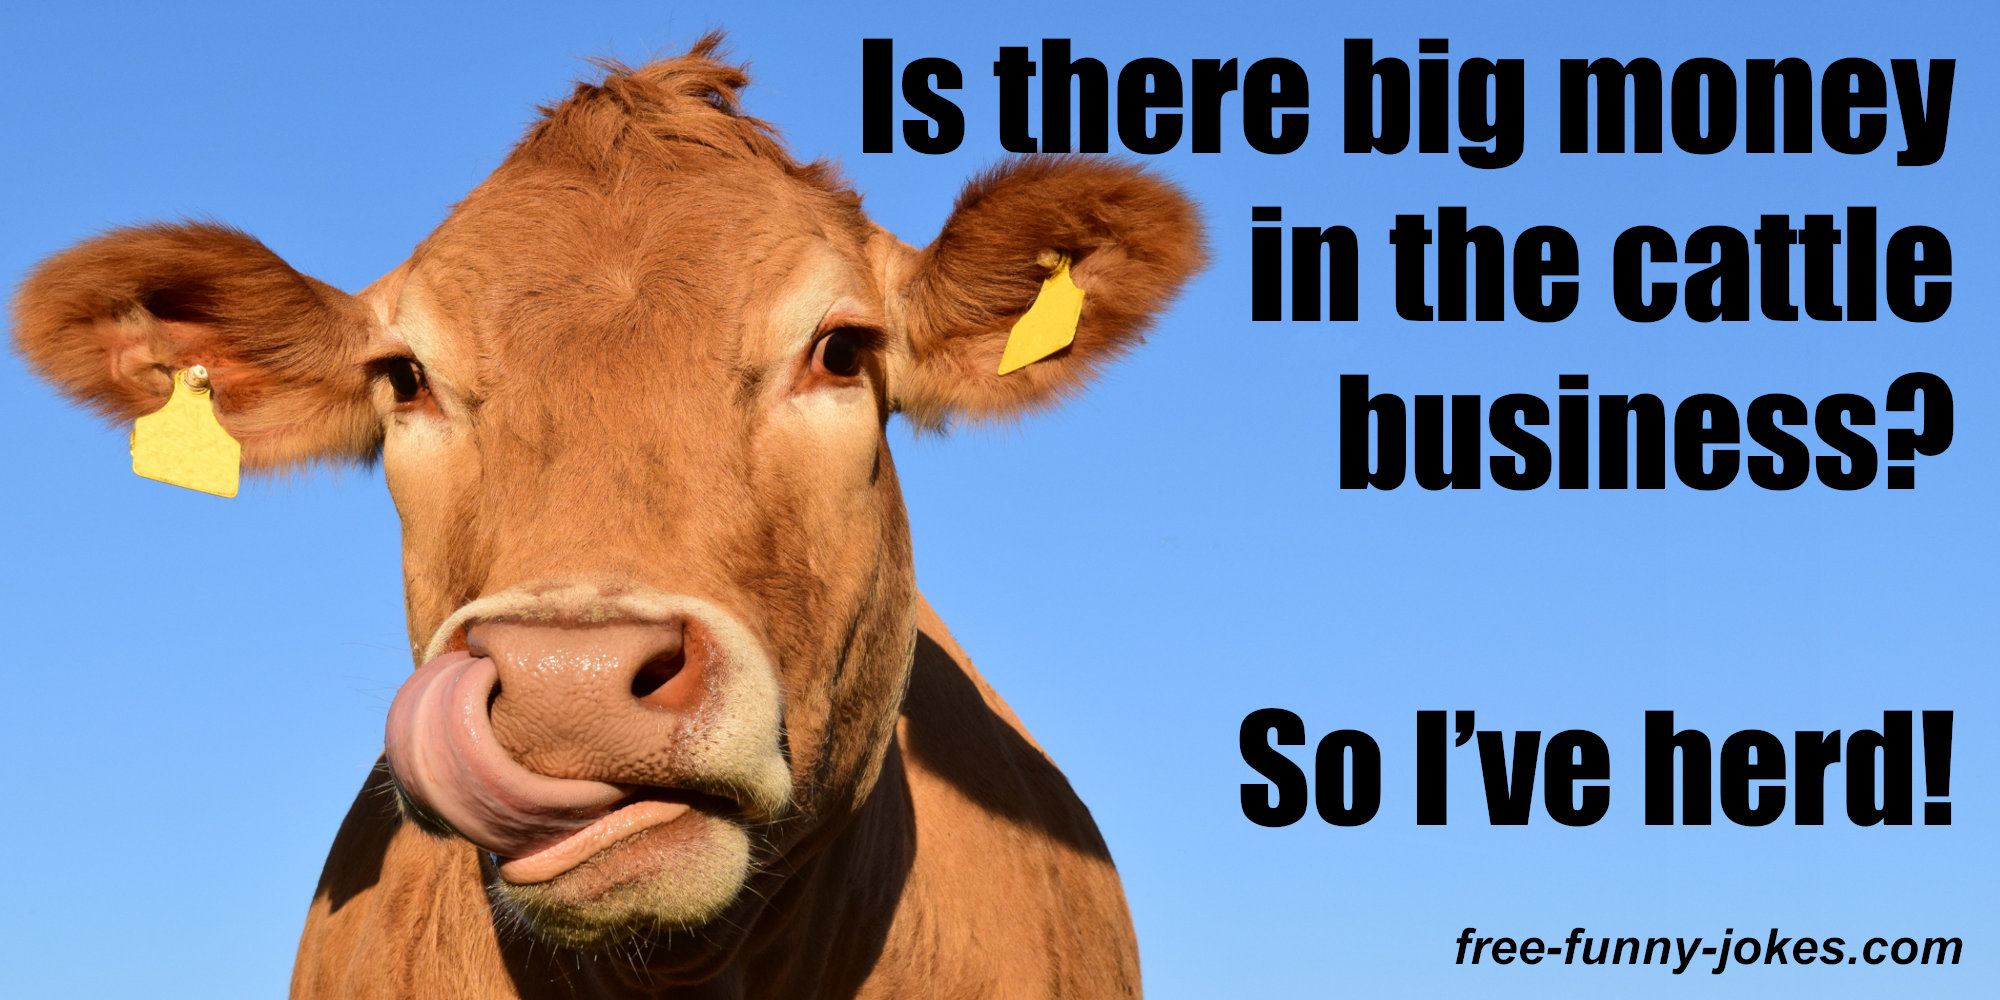 Funny Cow Jokes One Liners : Bghlbt3n6yn6im : Give yourself some quick ...